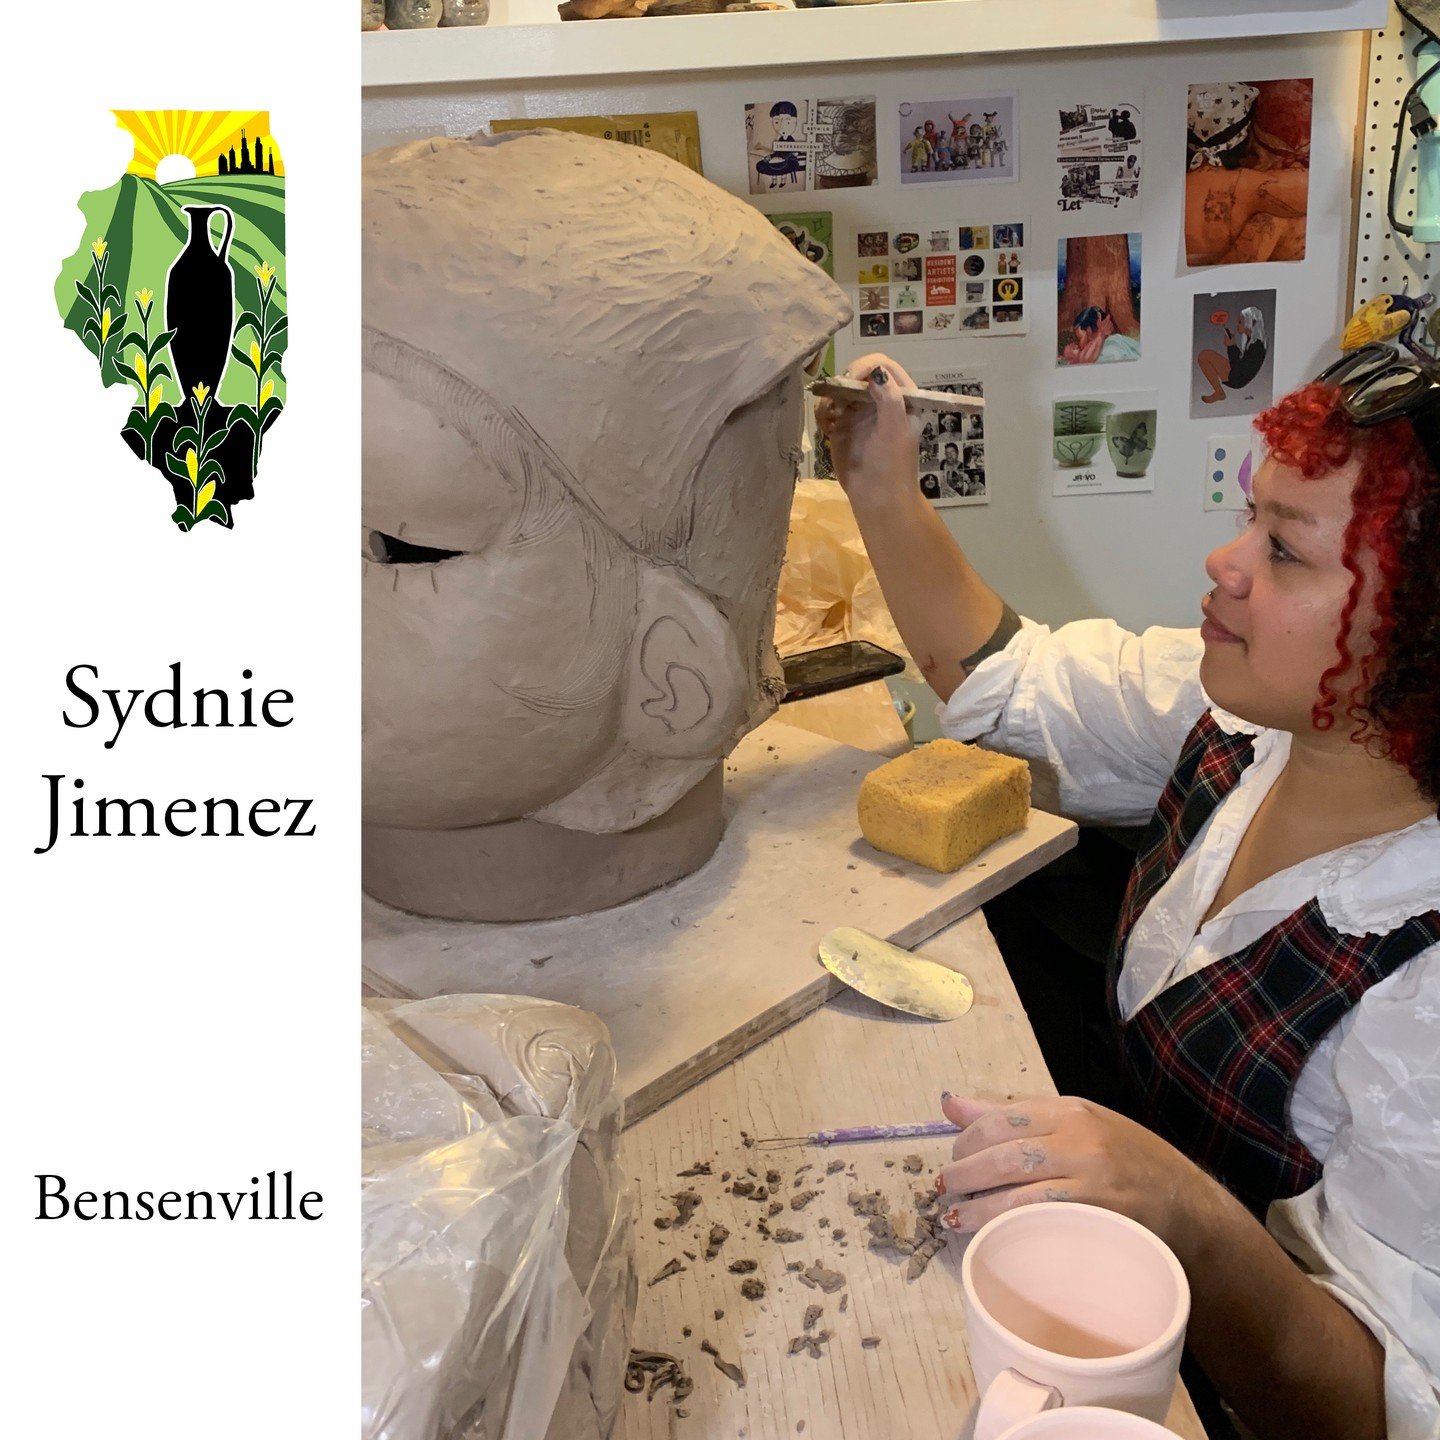 The first guest at the Bensenville stop we would like to introduce you to is Sydnie Jimenez. This year will be Sydnie&rsquo;s first participating in the Northern Illinois Pottery tour!

Sydnie Jimenez (b. Orlando, FL 1997) received a BFA from the Sch